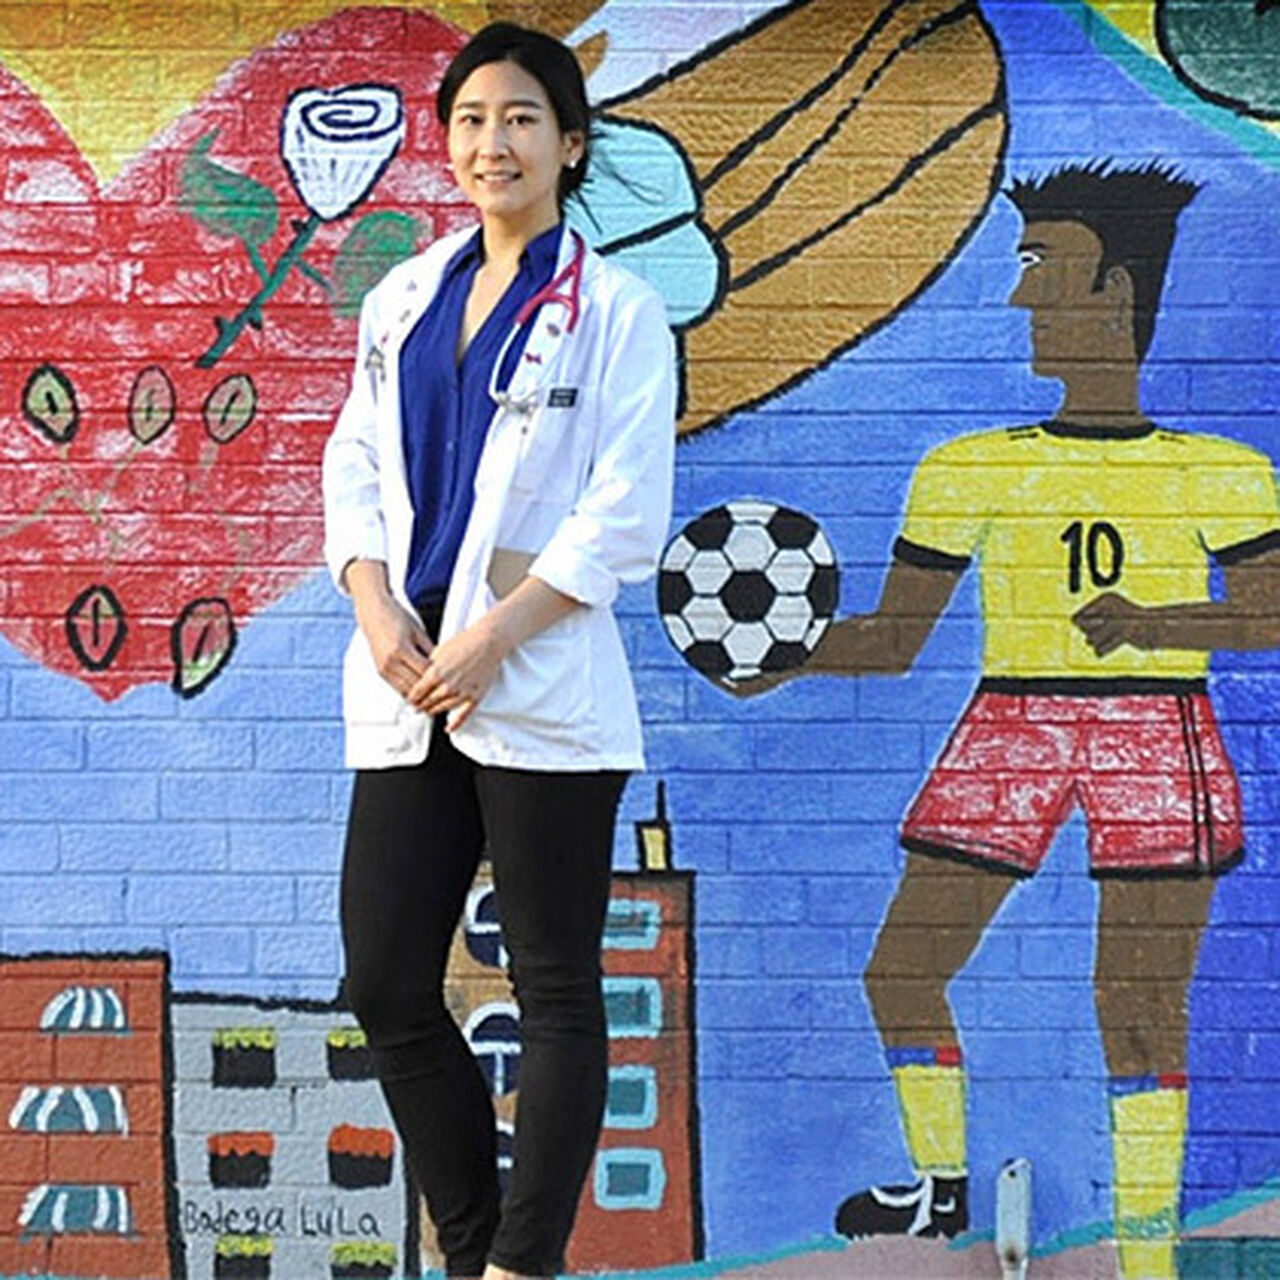 Medical student standing in front of mural image number 0